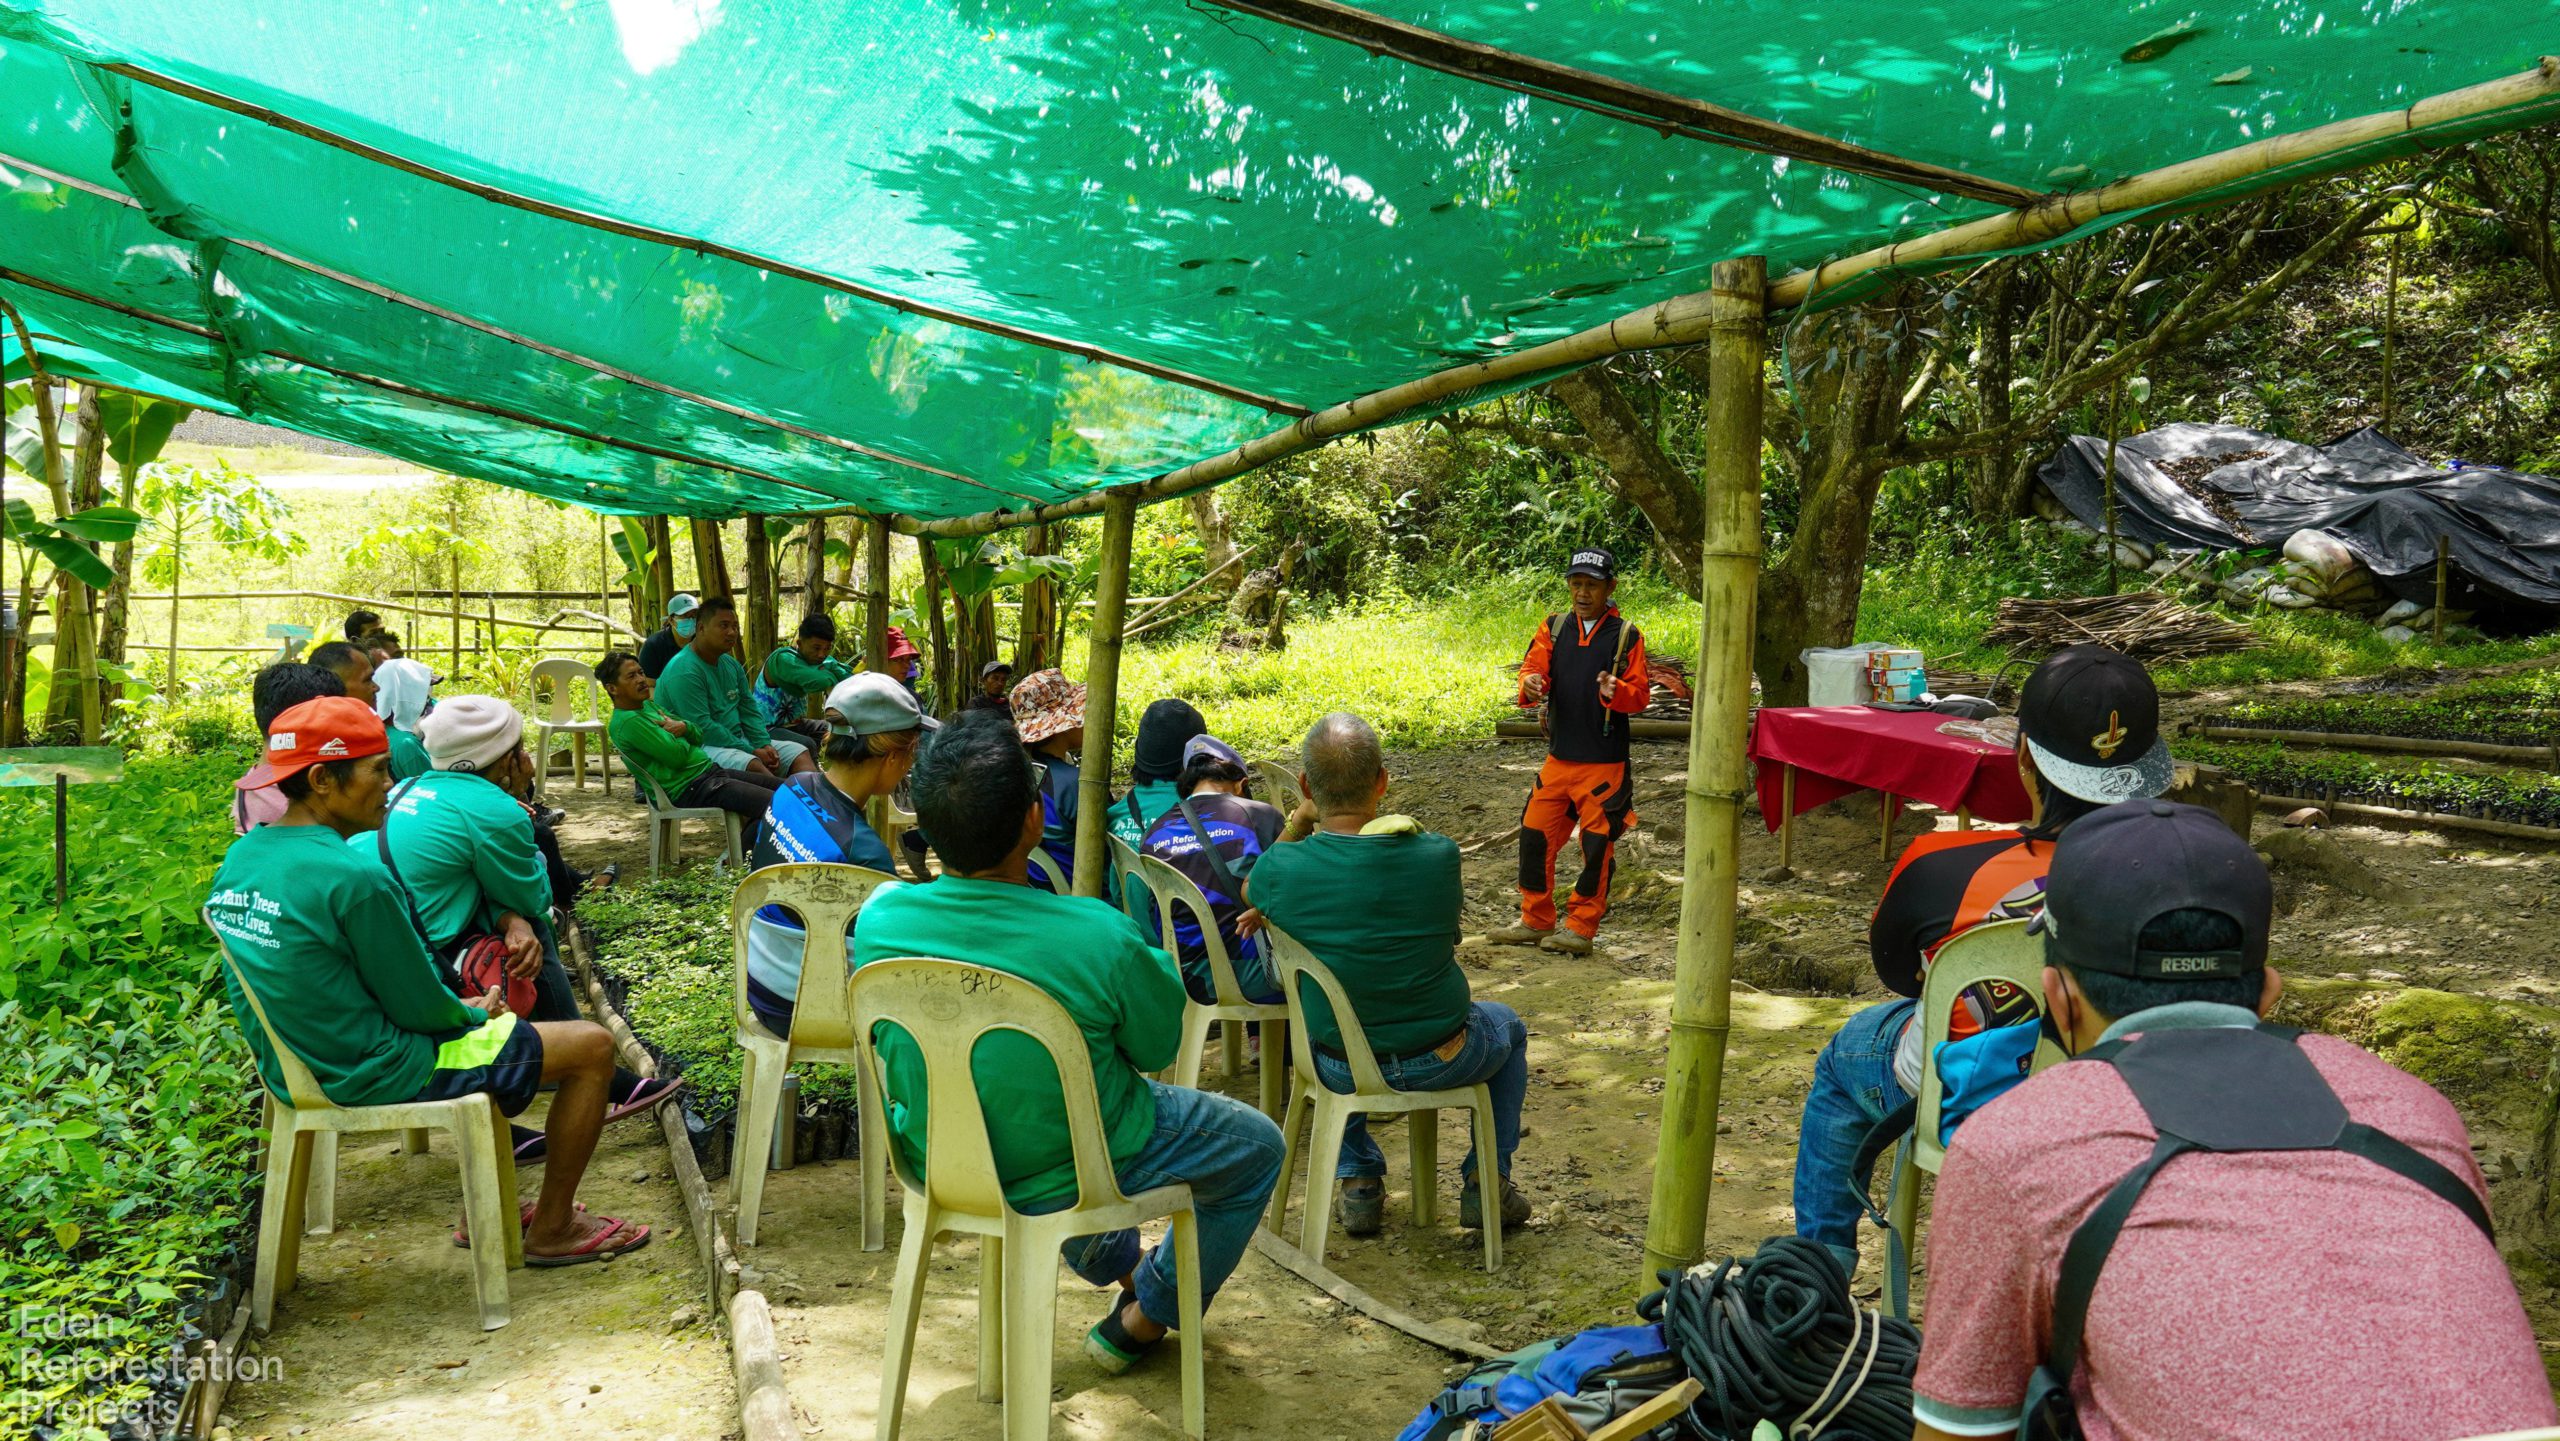 Workers having a meeting under bamboo structure